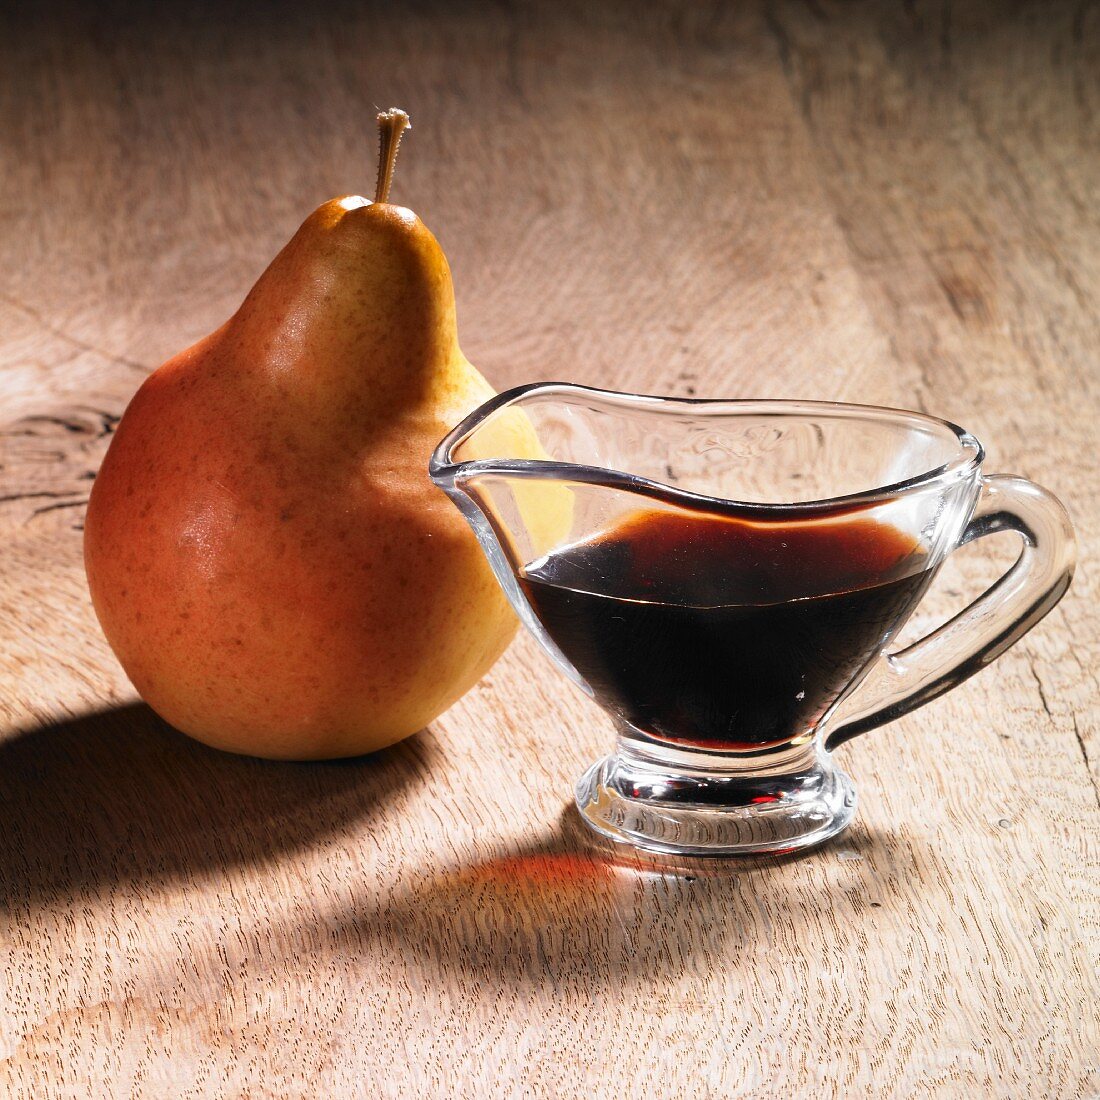 Apple and pear syrup in a gravy boat and a pear